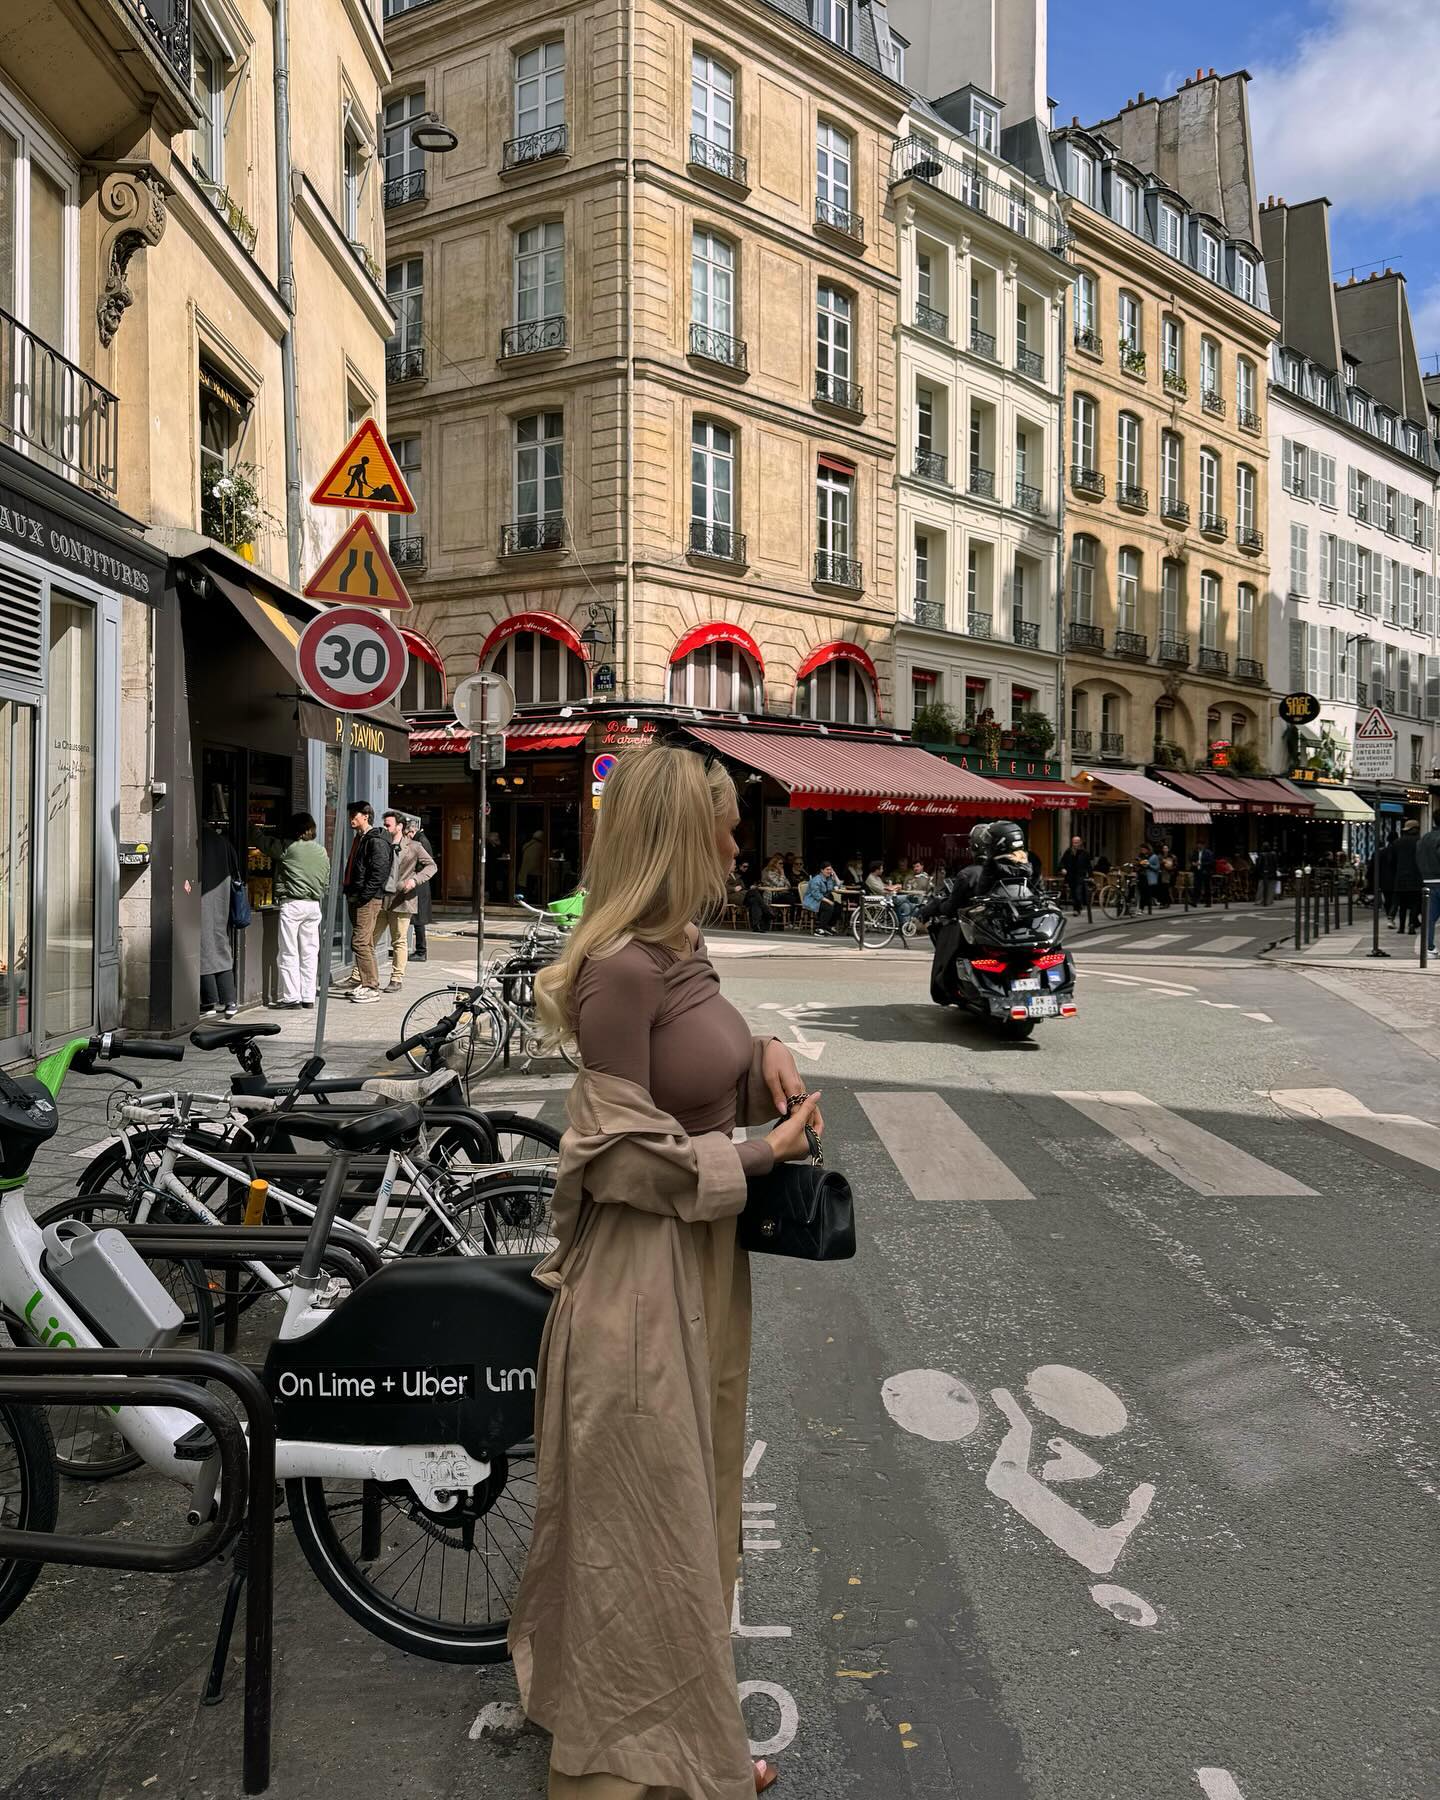 Where’s your favorite place to go in Paris? ❤️